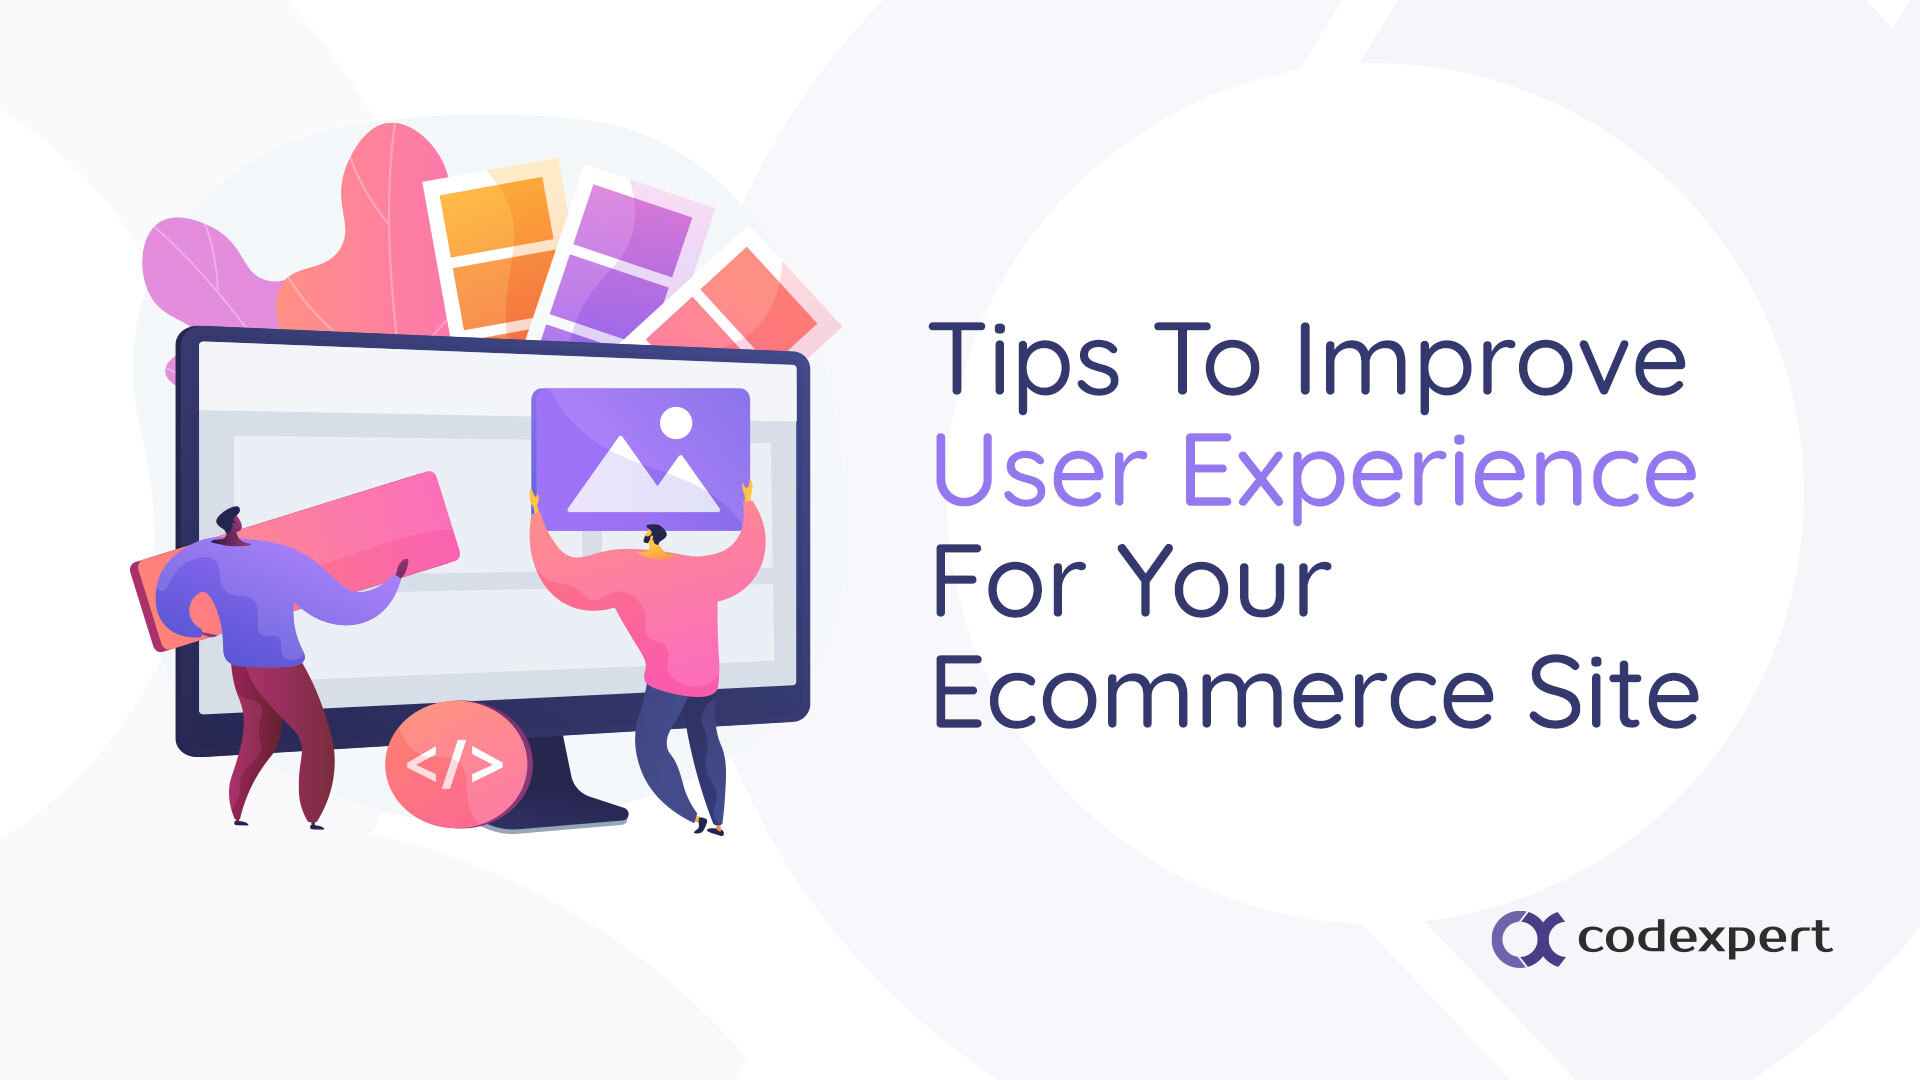 Tips for Improving User Experience for your Ecommerce site